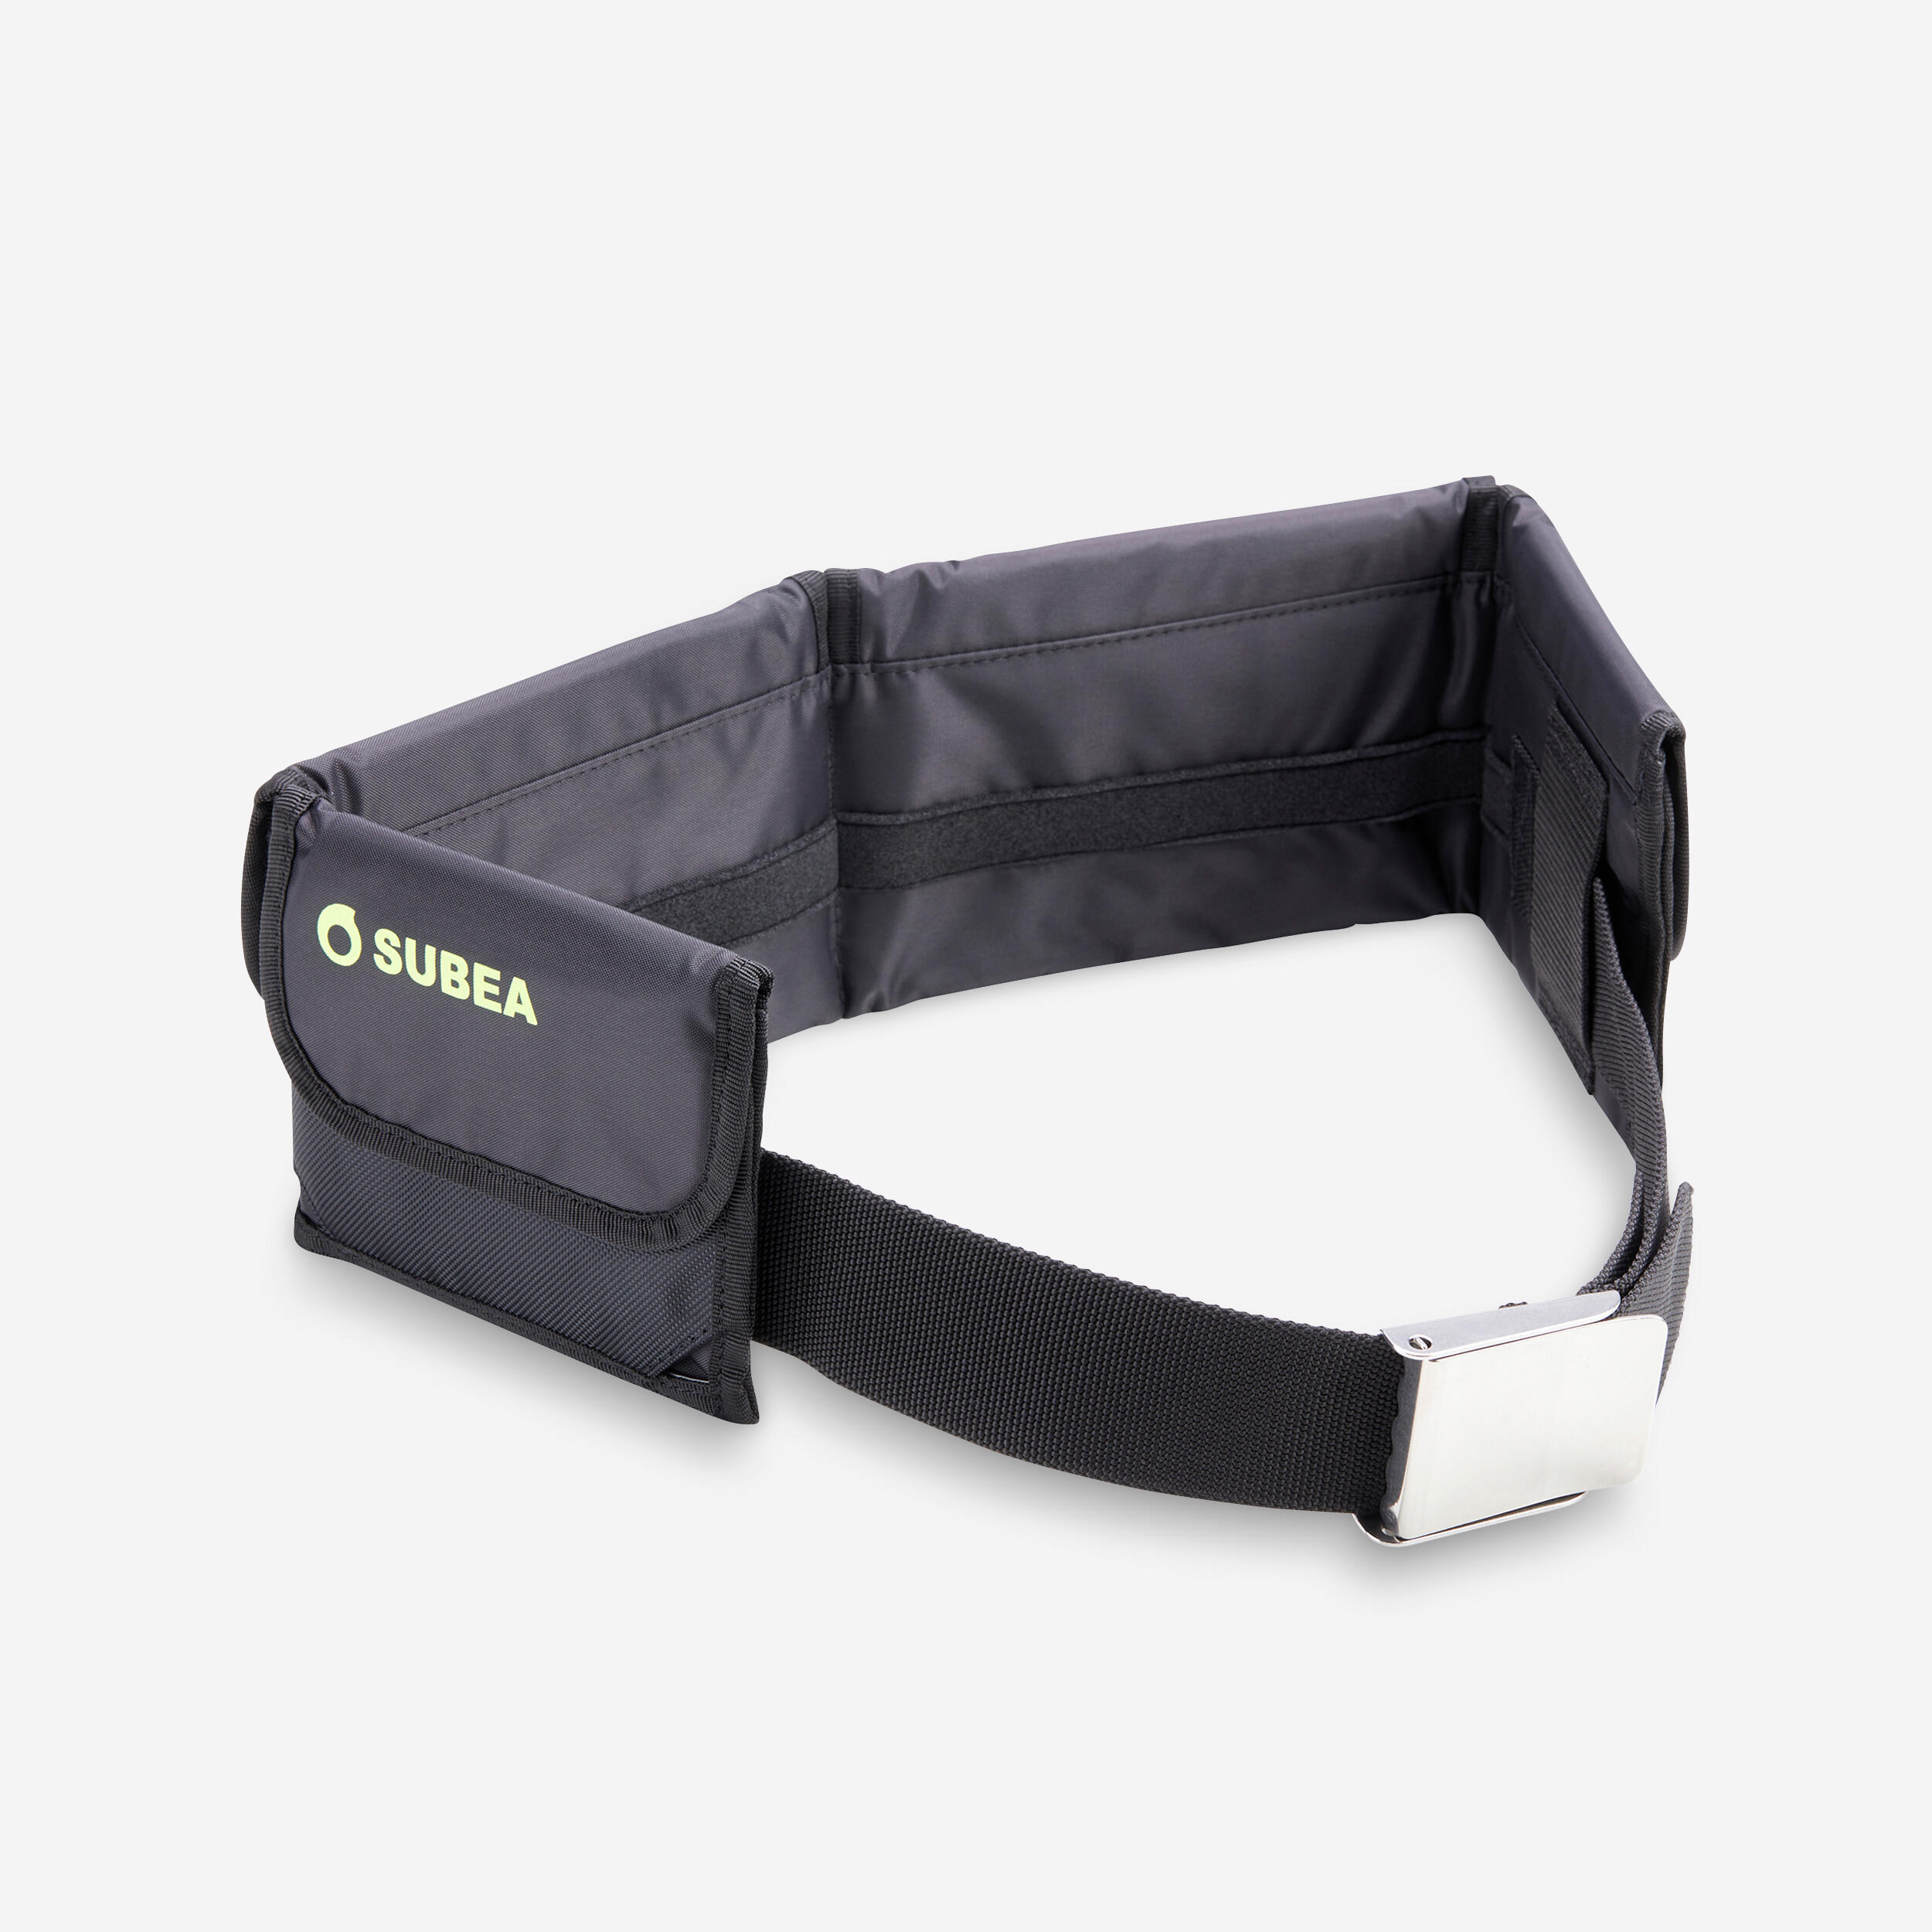 SUBEA Diving weight belt with soft pockets for lead weights